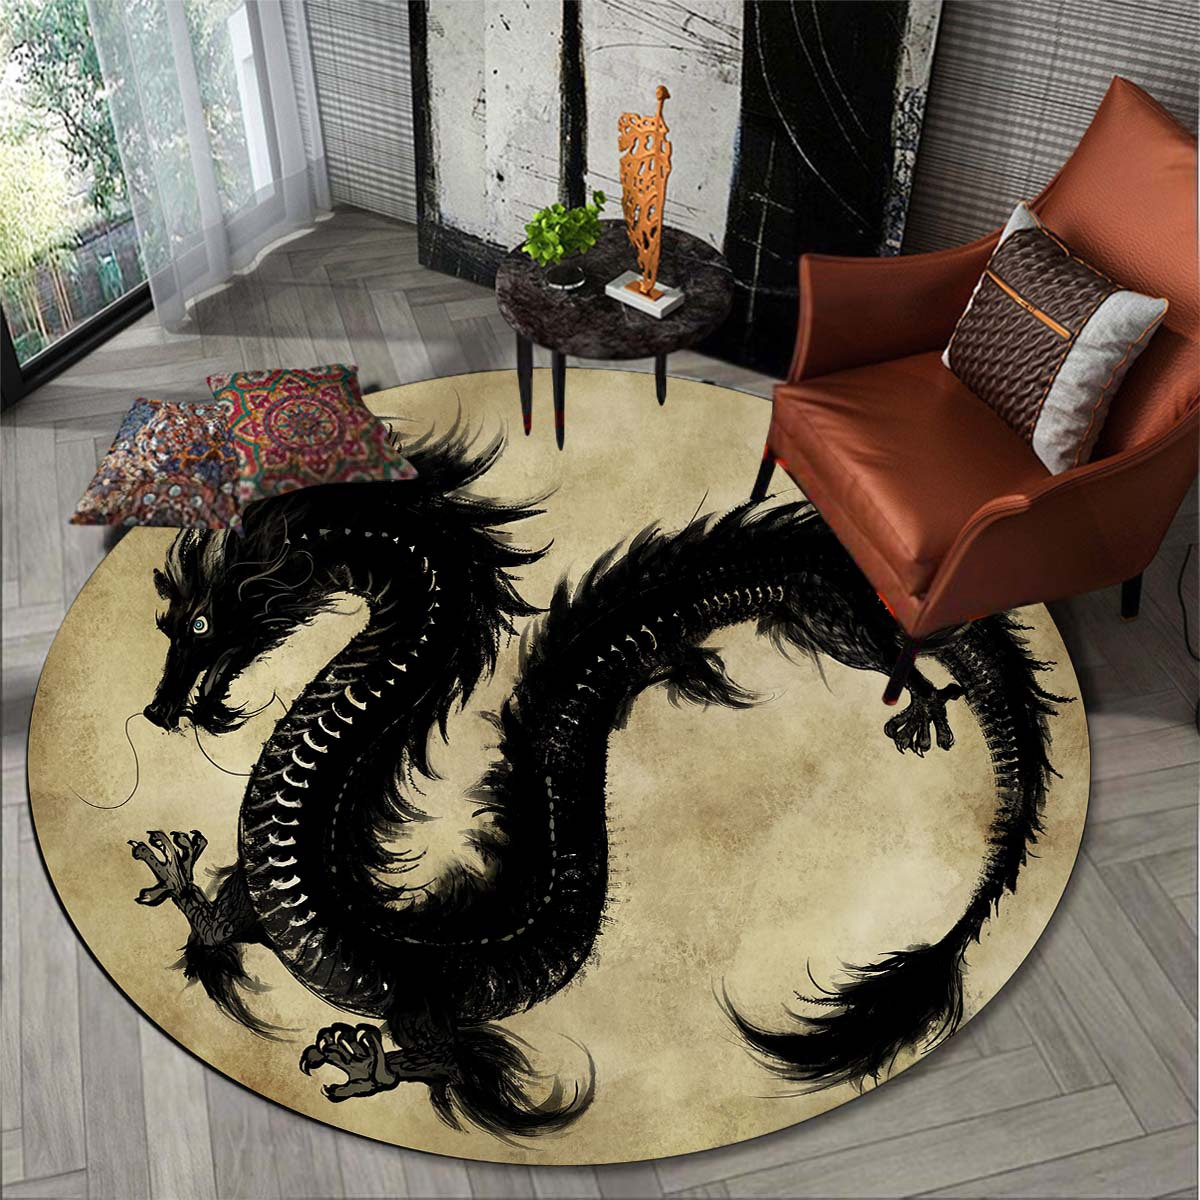  MJKIODPEV Area Rugs Vinyl Record with Cover on Wooden Table  Modern Area Rug Abstract Soft Non-Slip Floor Carpet Indoor/Outdoor Rugs for  Living Room Bedroom Kids Room : Home & Kitchen